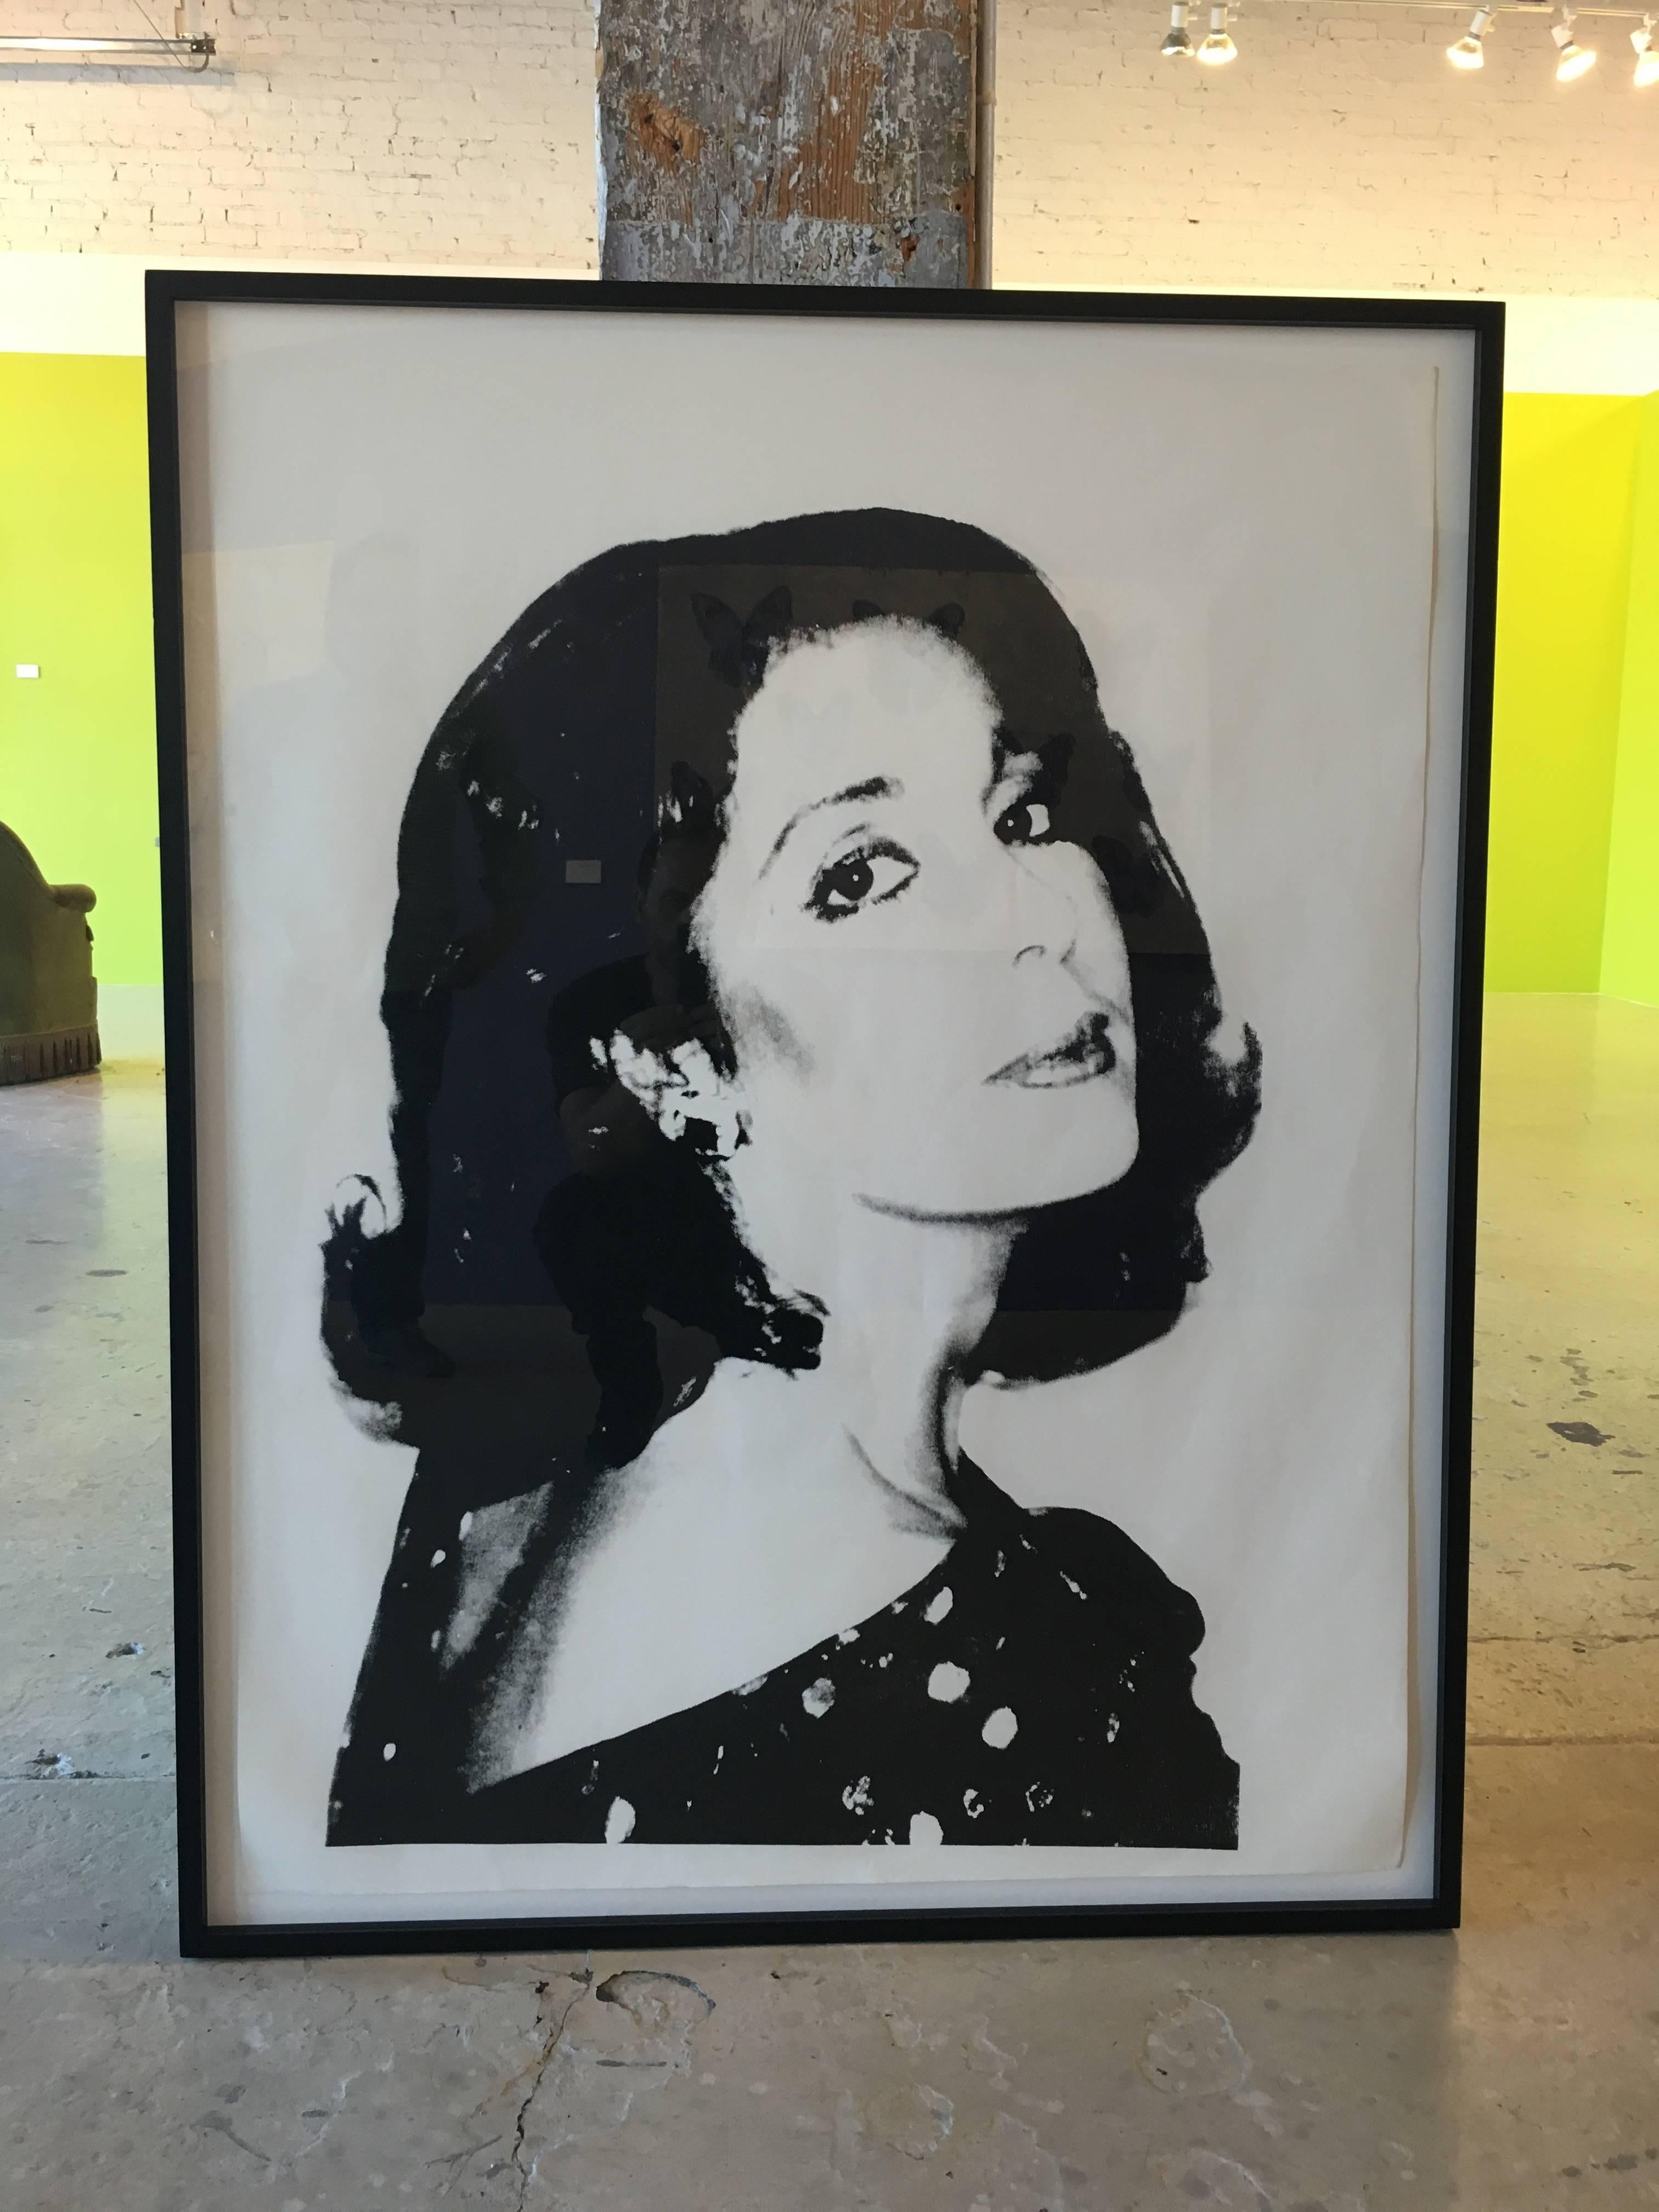 Screenprint on Curtis rag paper
1977
Authorized by The Andy Warhol Foundation for the Visual Arts
stamped on verso
EXTREMELY RARE!

PROVENANCE-
ANDY WARHOL AT CHRISTIE'S SOLD TO BENEFIT THE ANDY WARHOL FOUNDATION FOR THE VISUAL ARTS
SALE